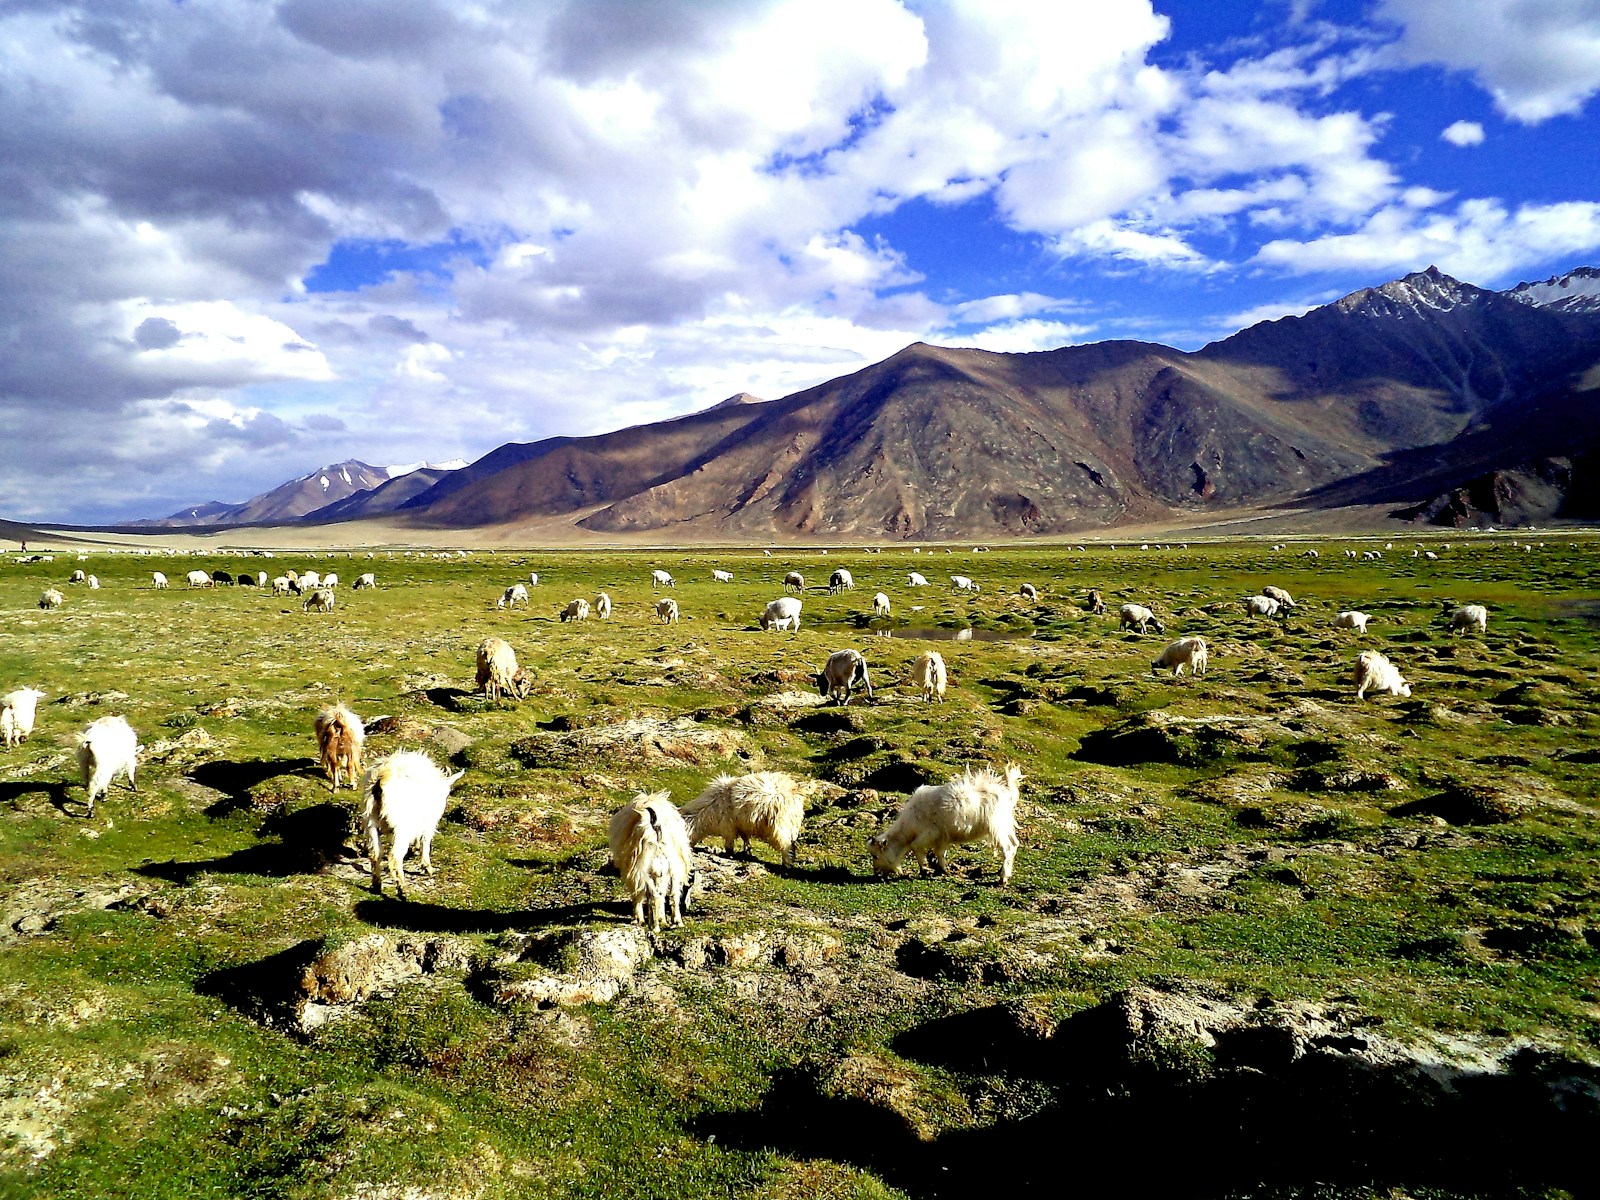 herd of white sheep on green grass field during daytime